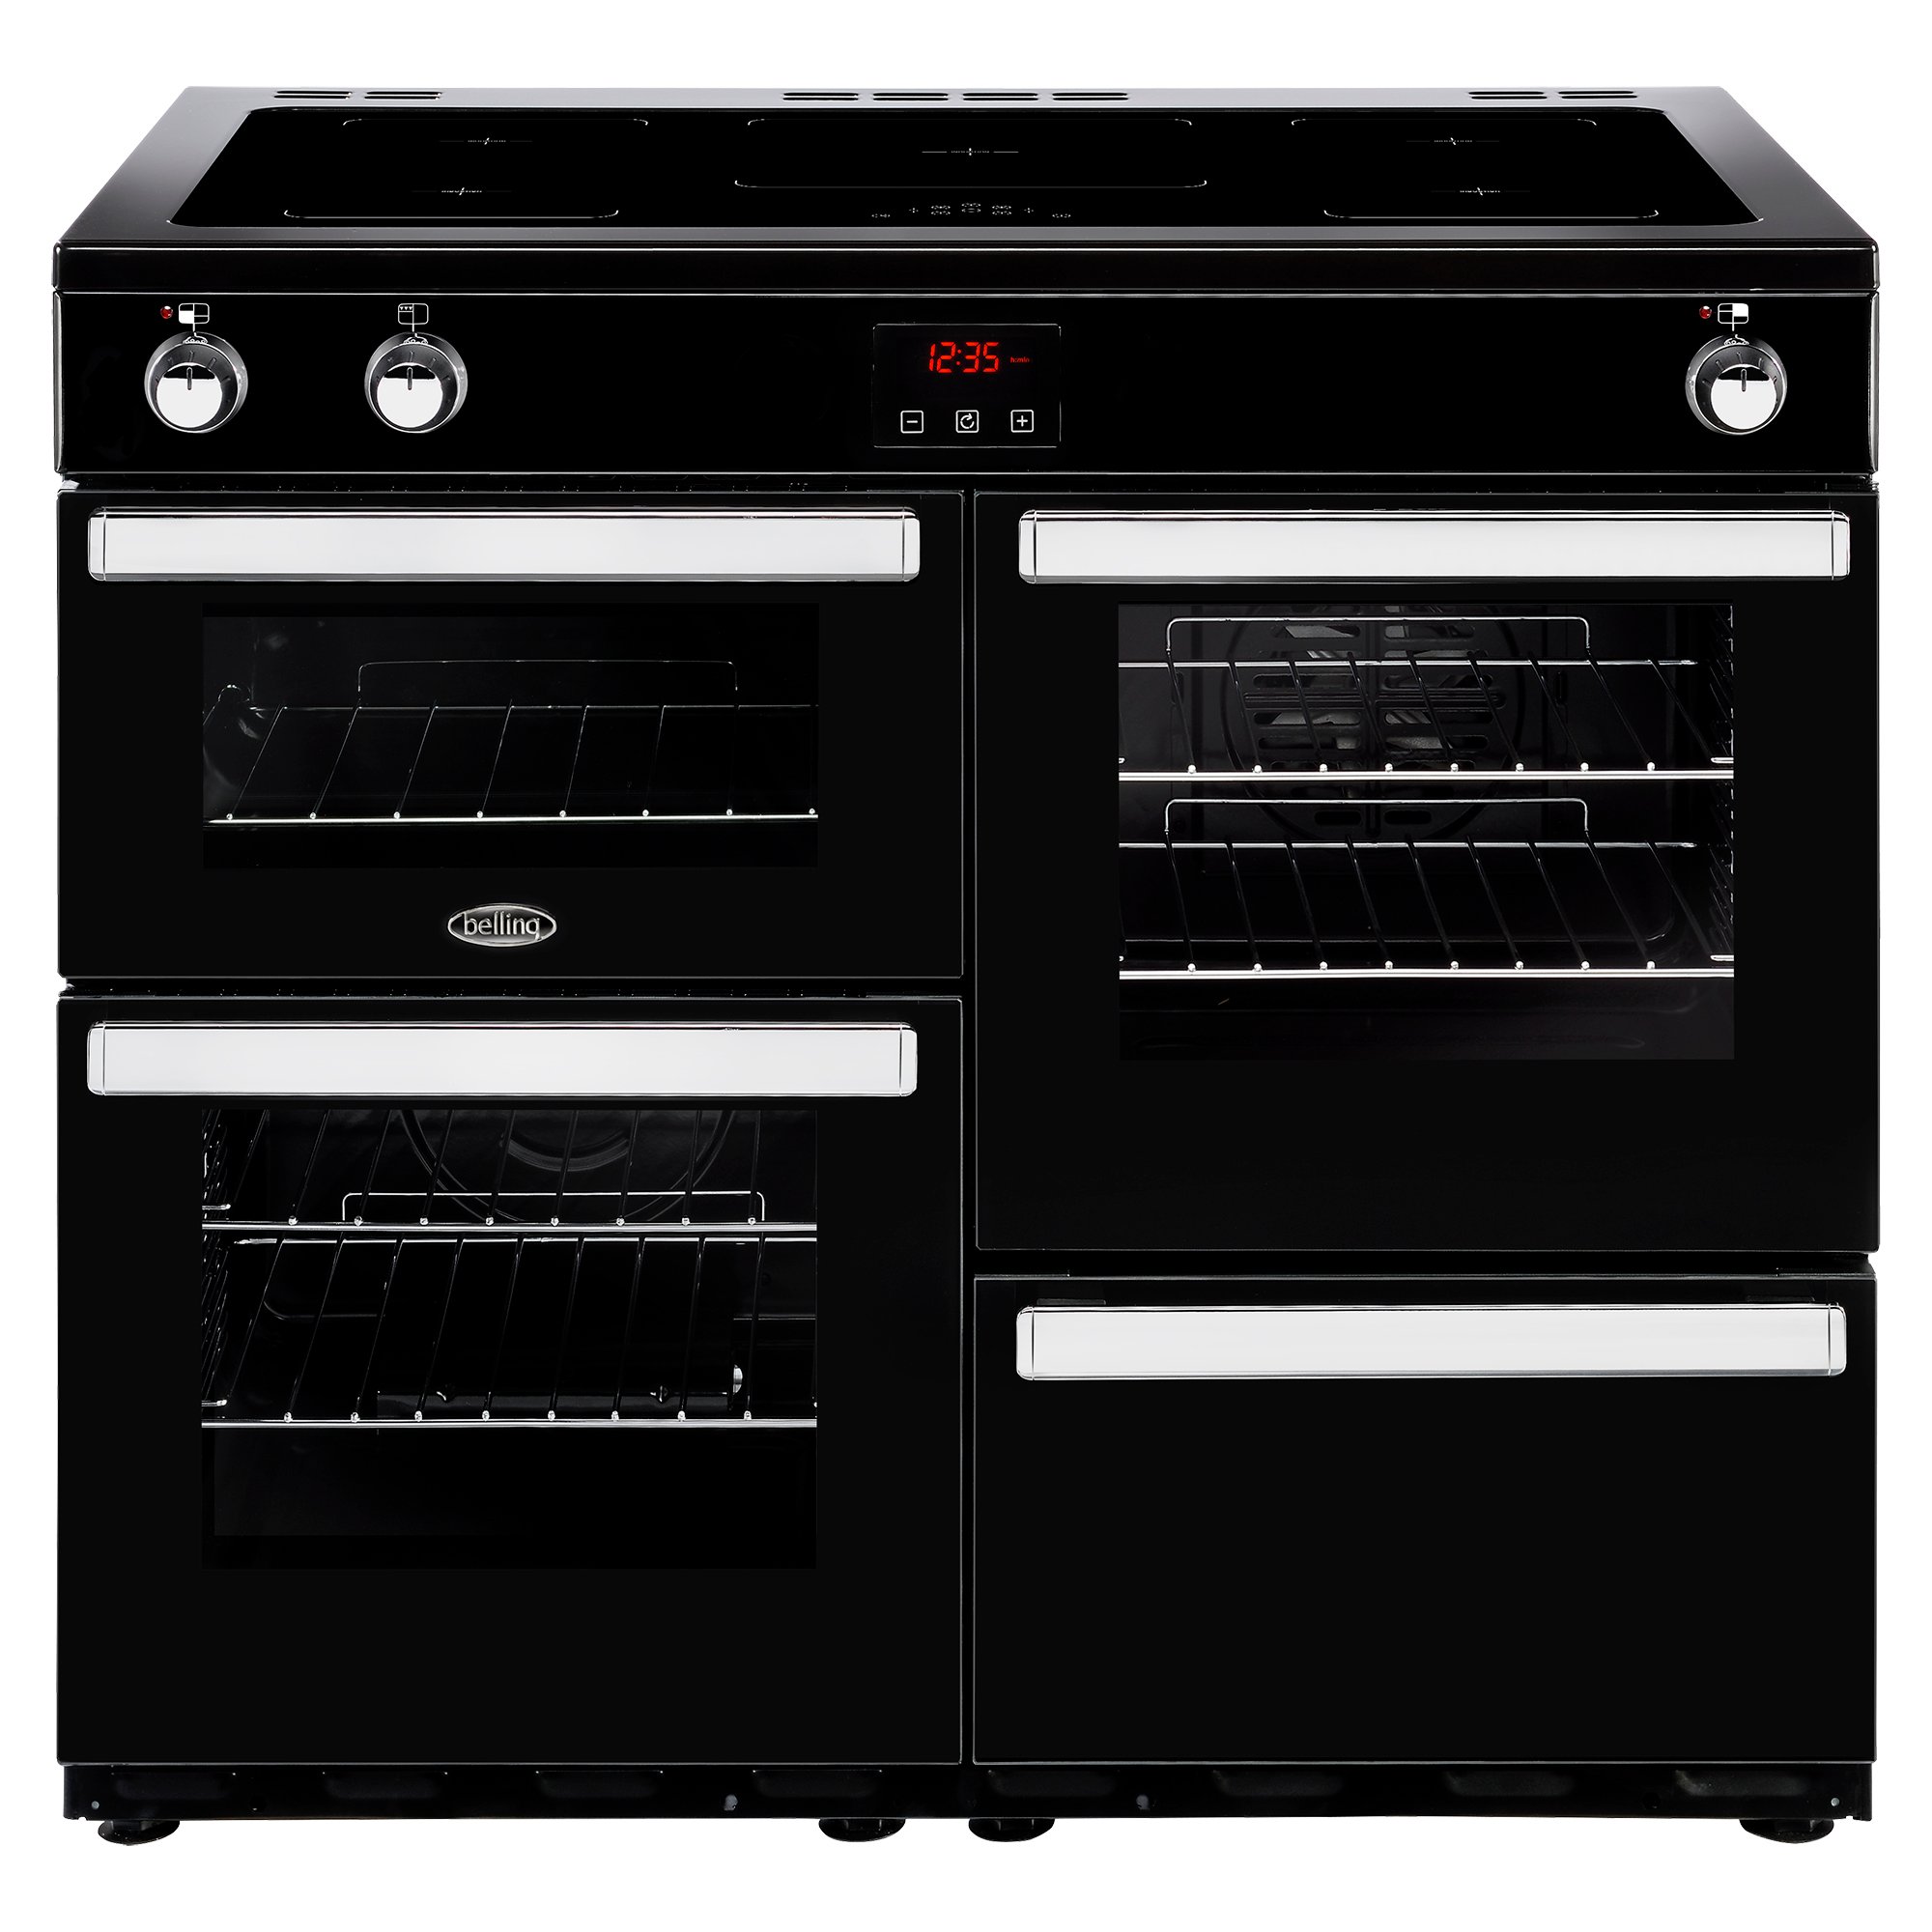 100cm electric range cooker with induction hotplate and smart Link+ technology, Maxi-Clock and easy clean enamel. Requires 32A connection.